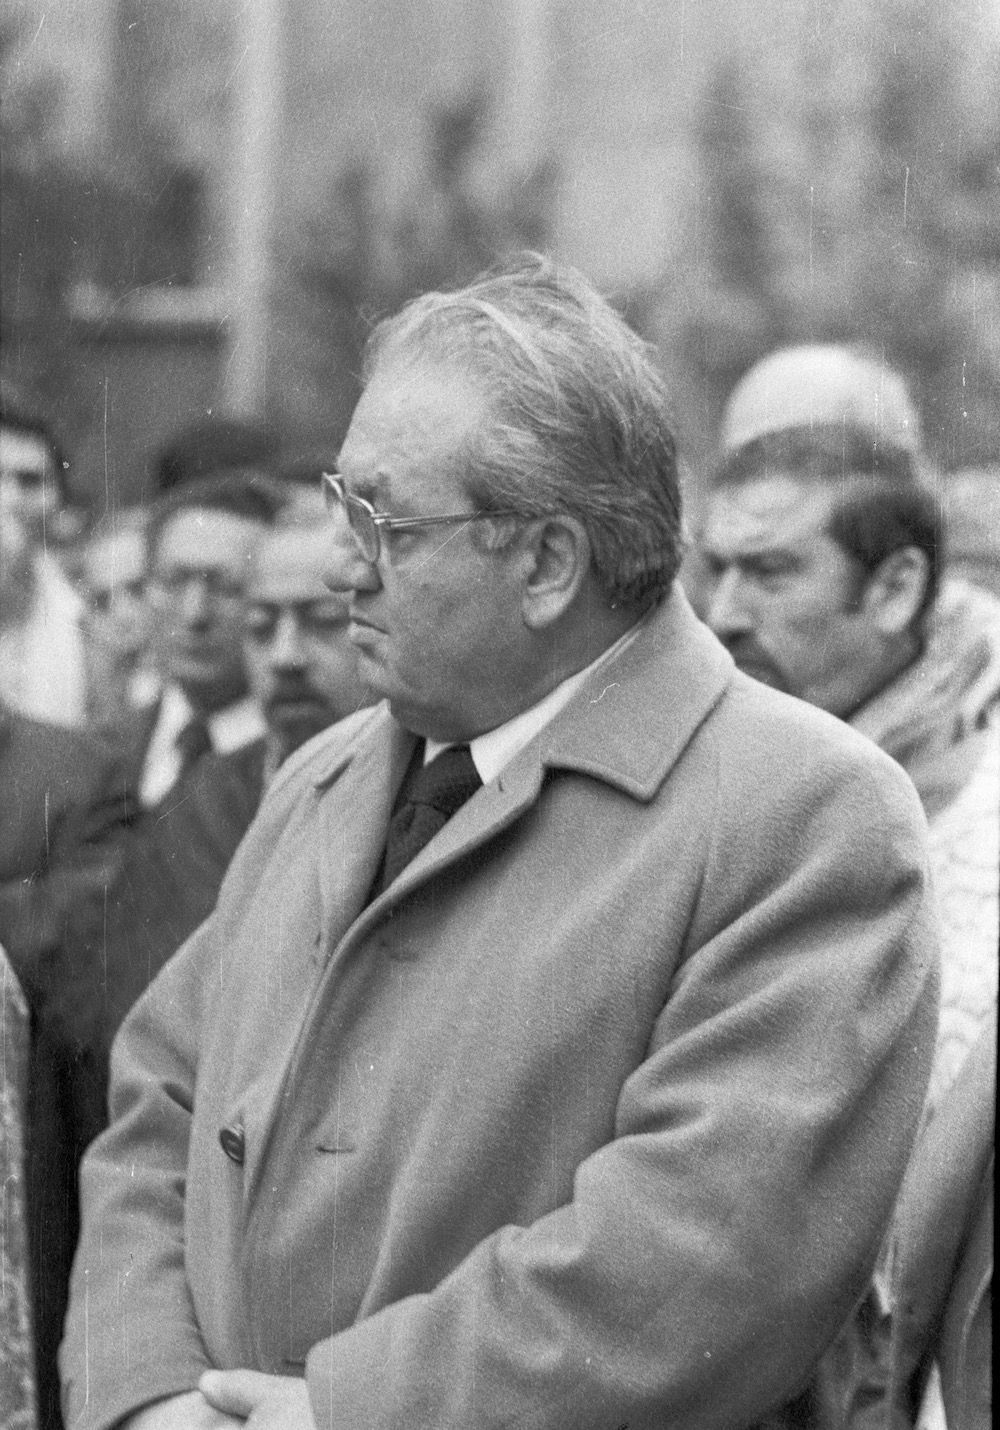 coll-vheloyan-defile-24avril1976-0024 - Année: 1976